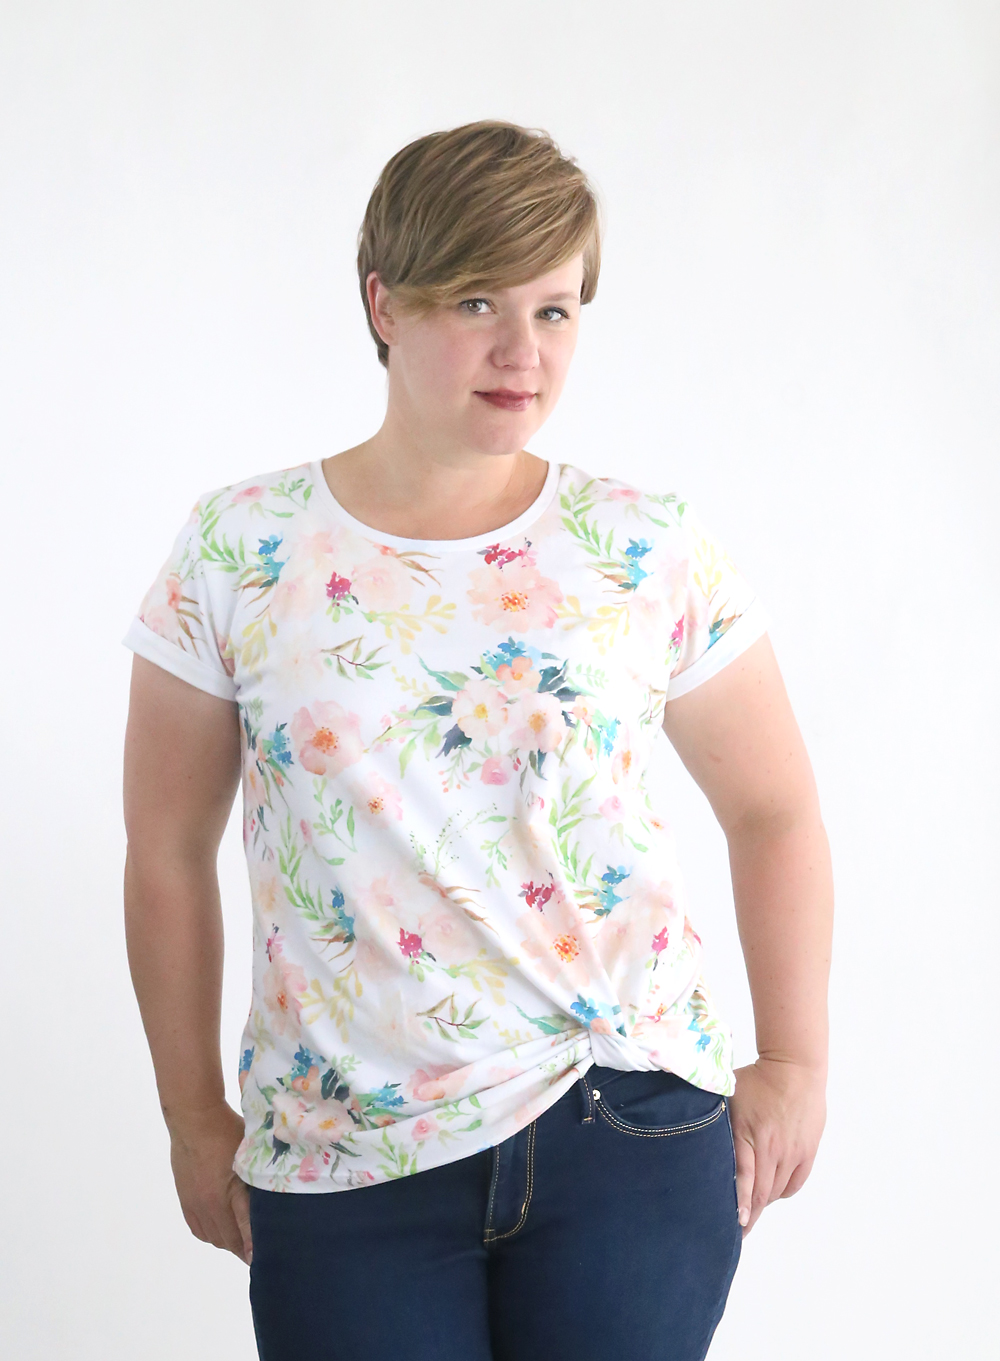 the twist knot tee free sewing pattern - It's Always Autumn